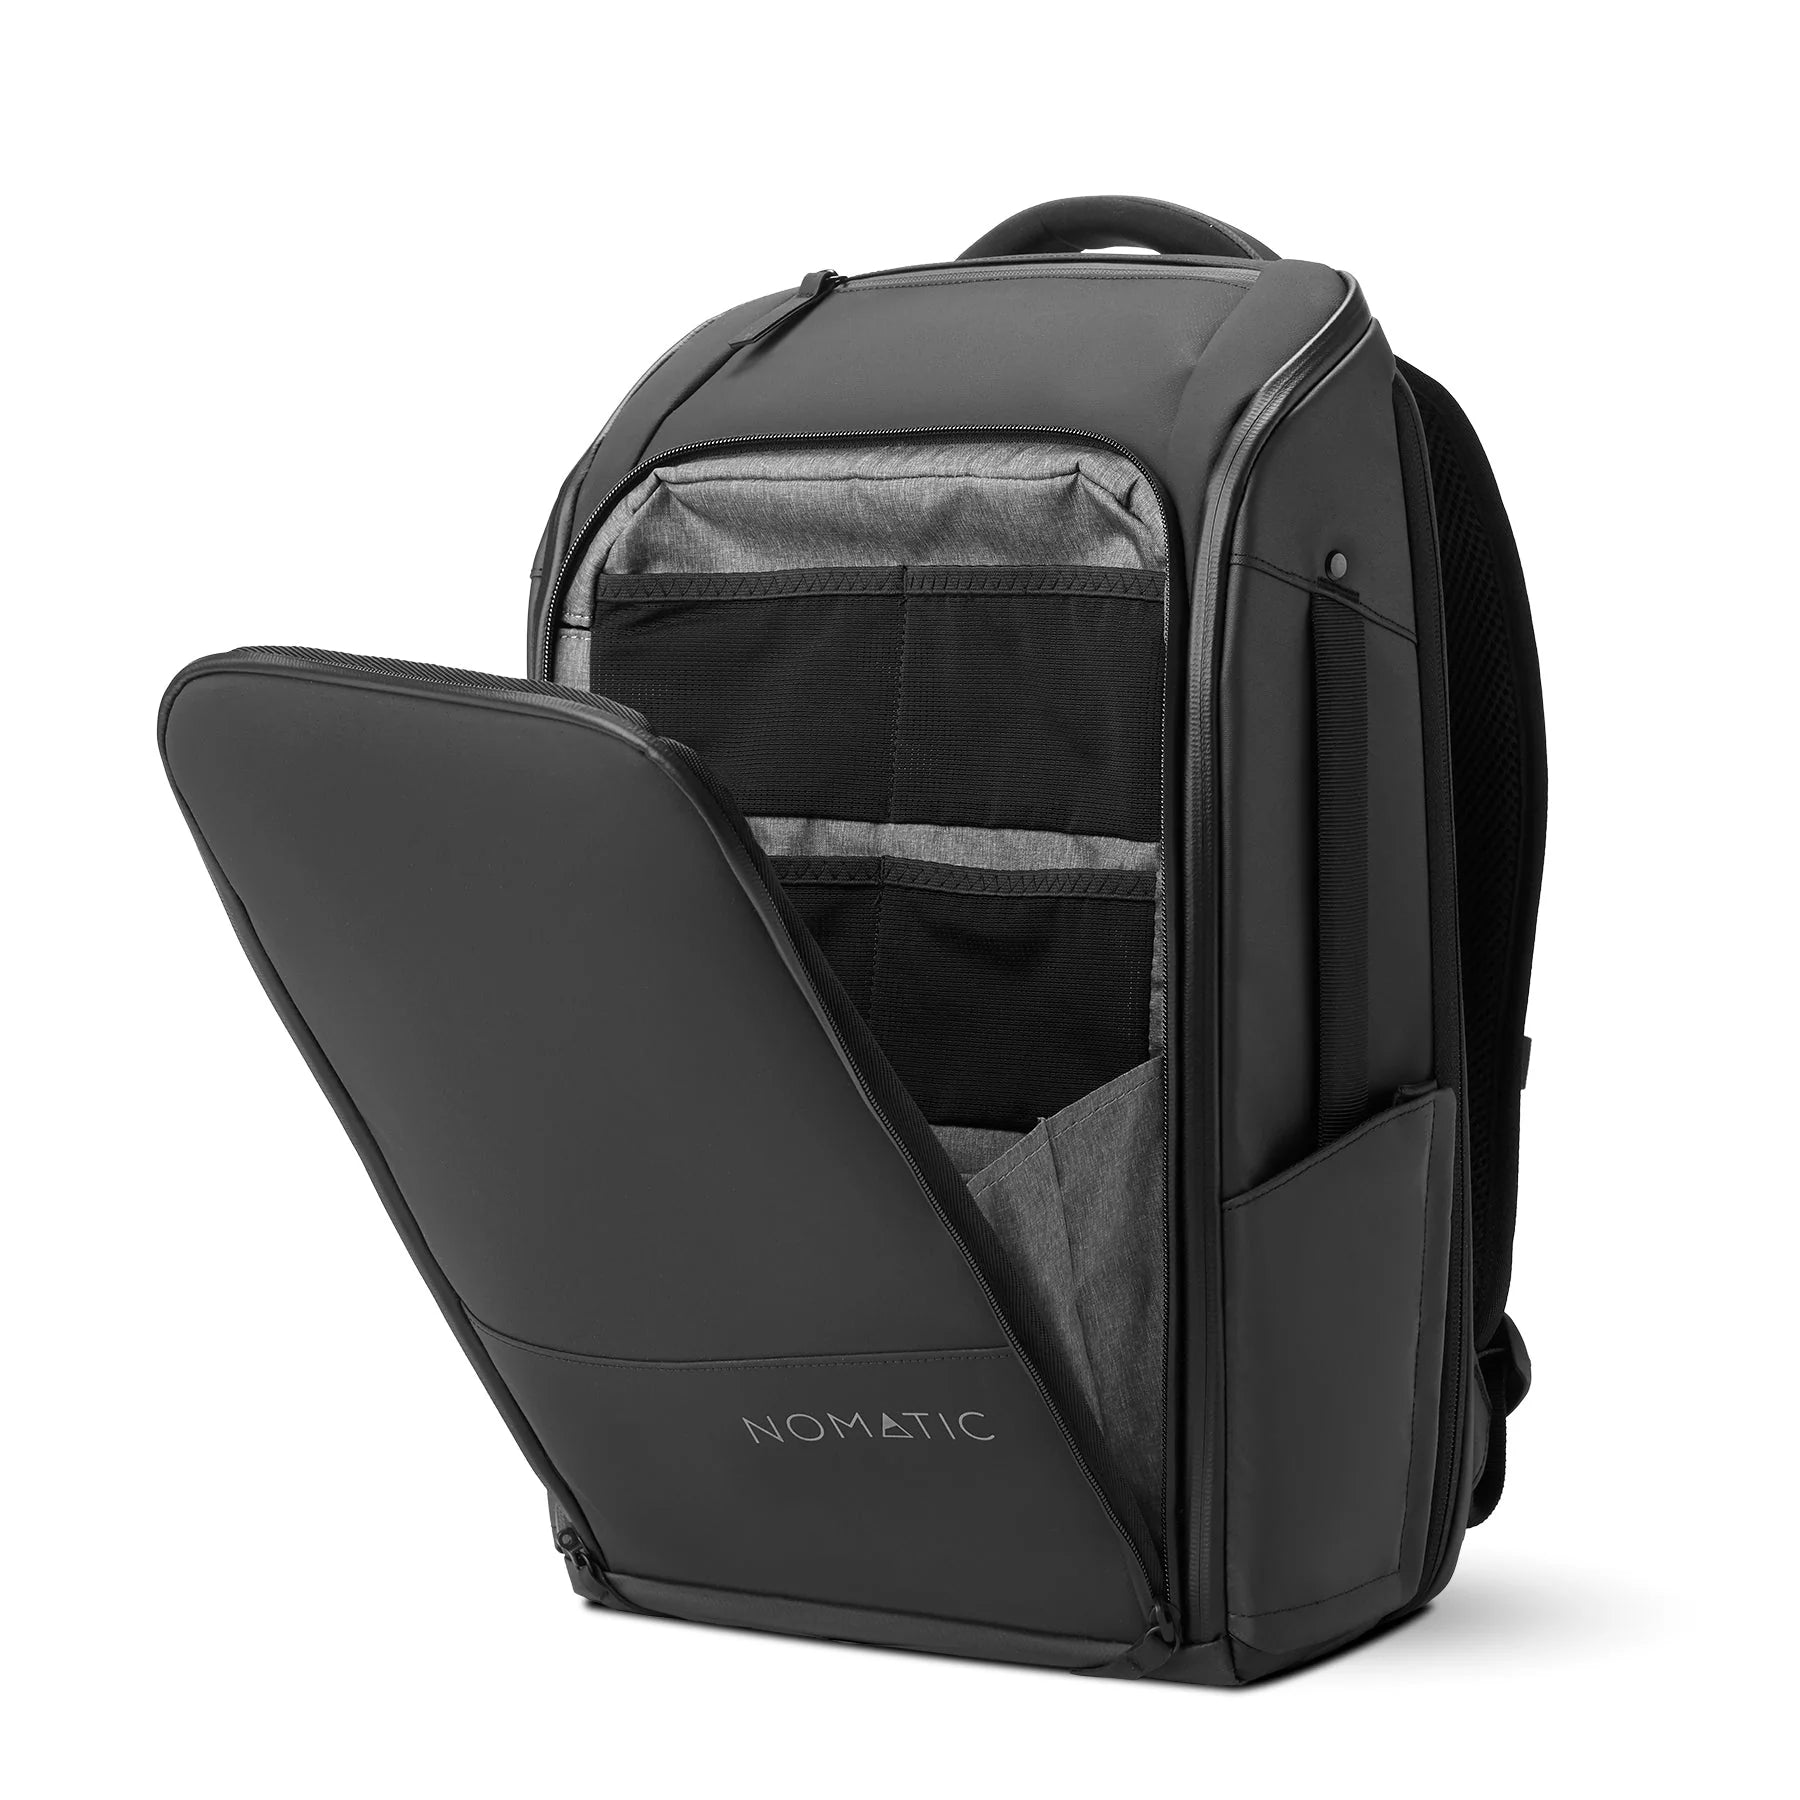 Premium Backpack: The Ultimate Travel Companion